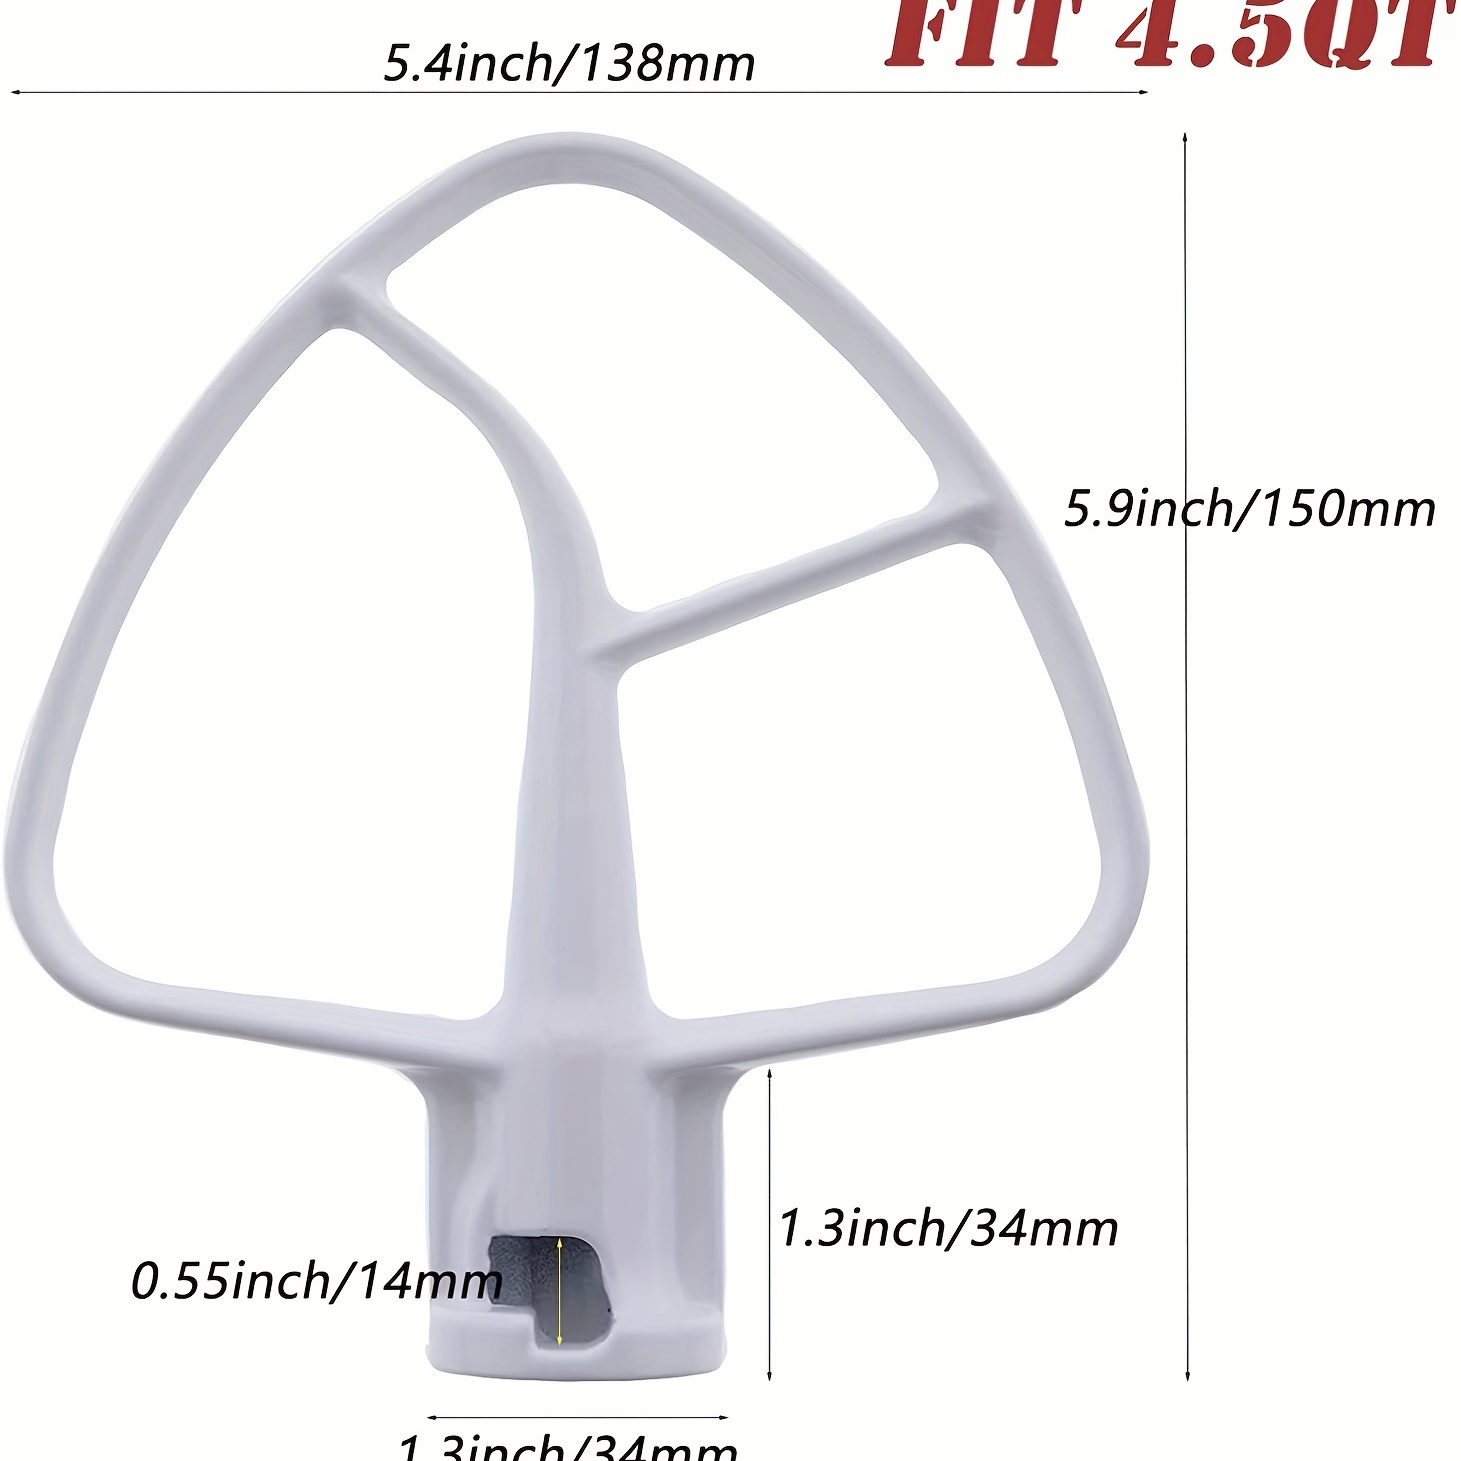 Kitchen Mixer Aid Paddle Attachment For Stand Mixer-k45b Coated Flat Beater  Perfectly Compatible With 4.5 Qt Tilt-head Stand Mixer Fit For Ksm90,k45, -  Temu